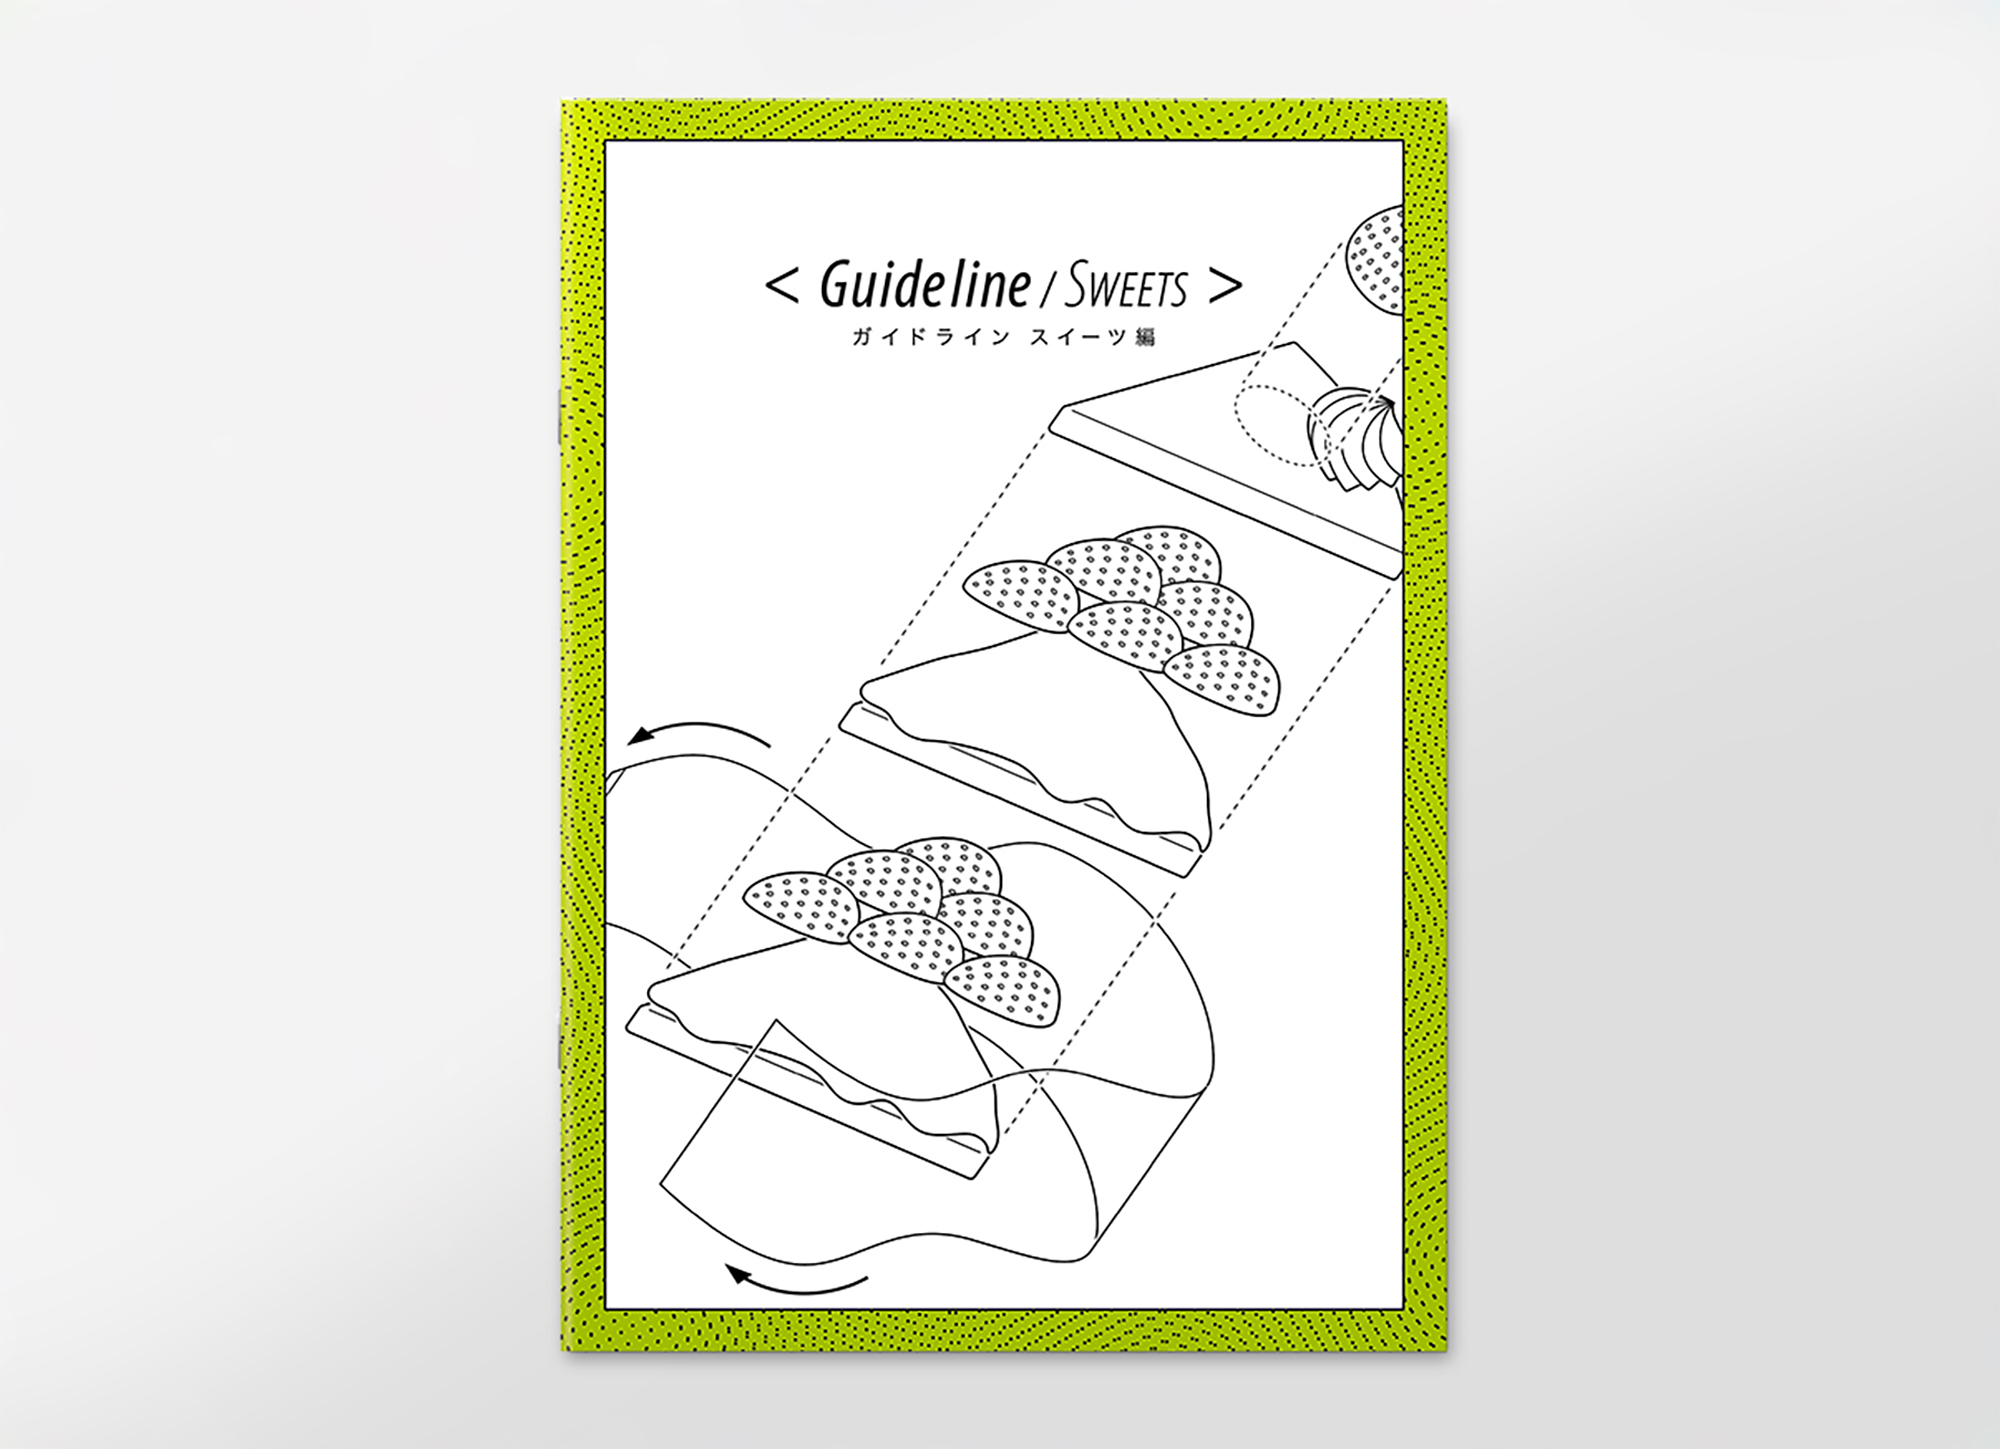 Guideline/SWEETS